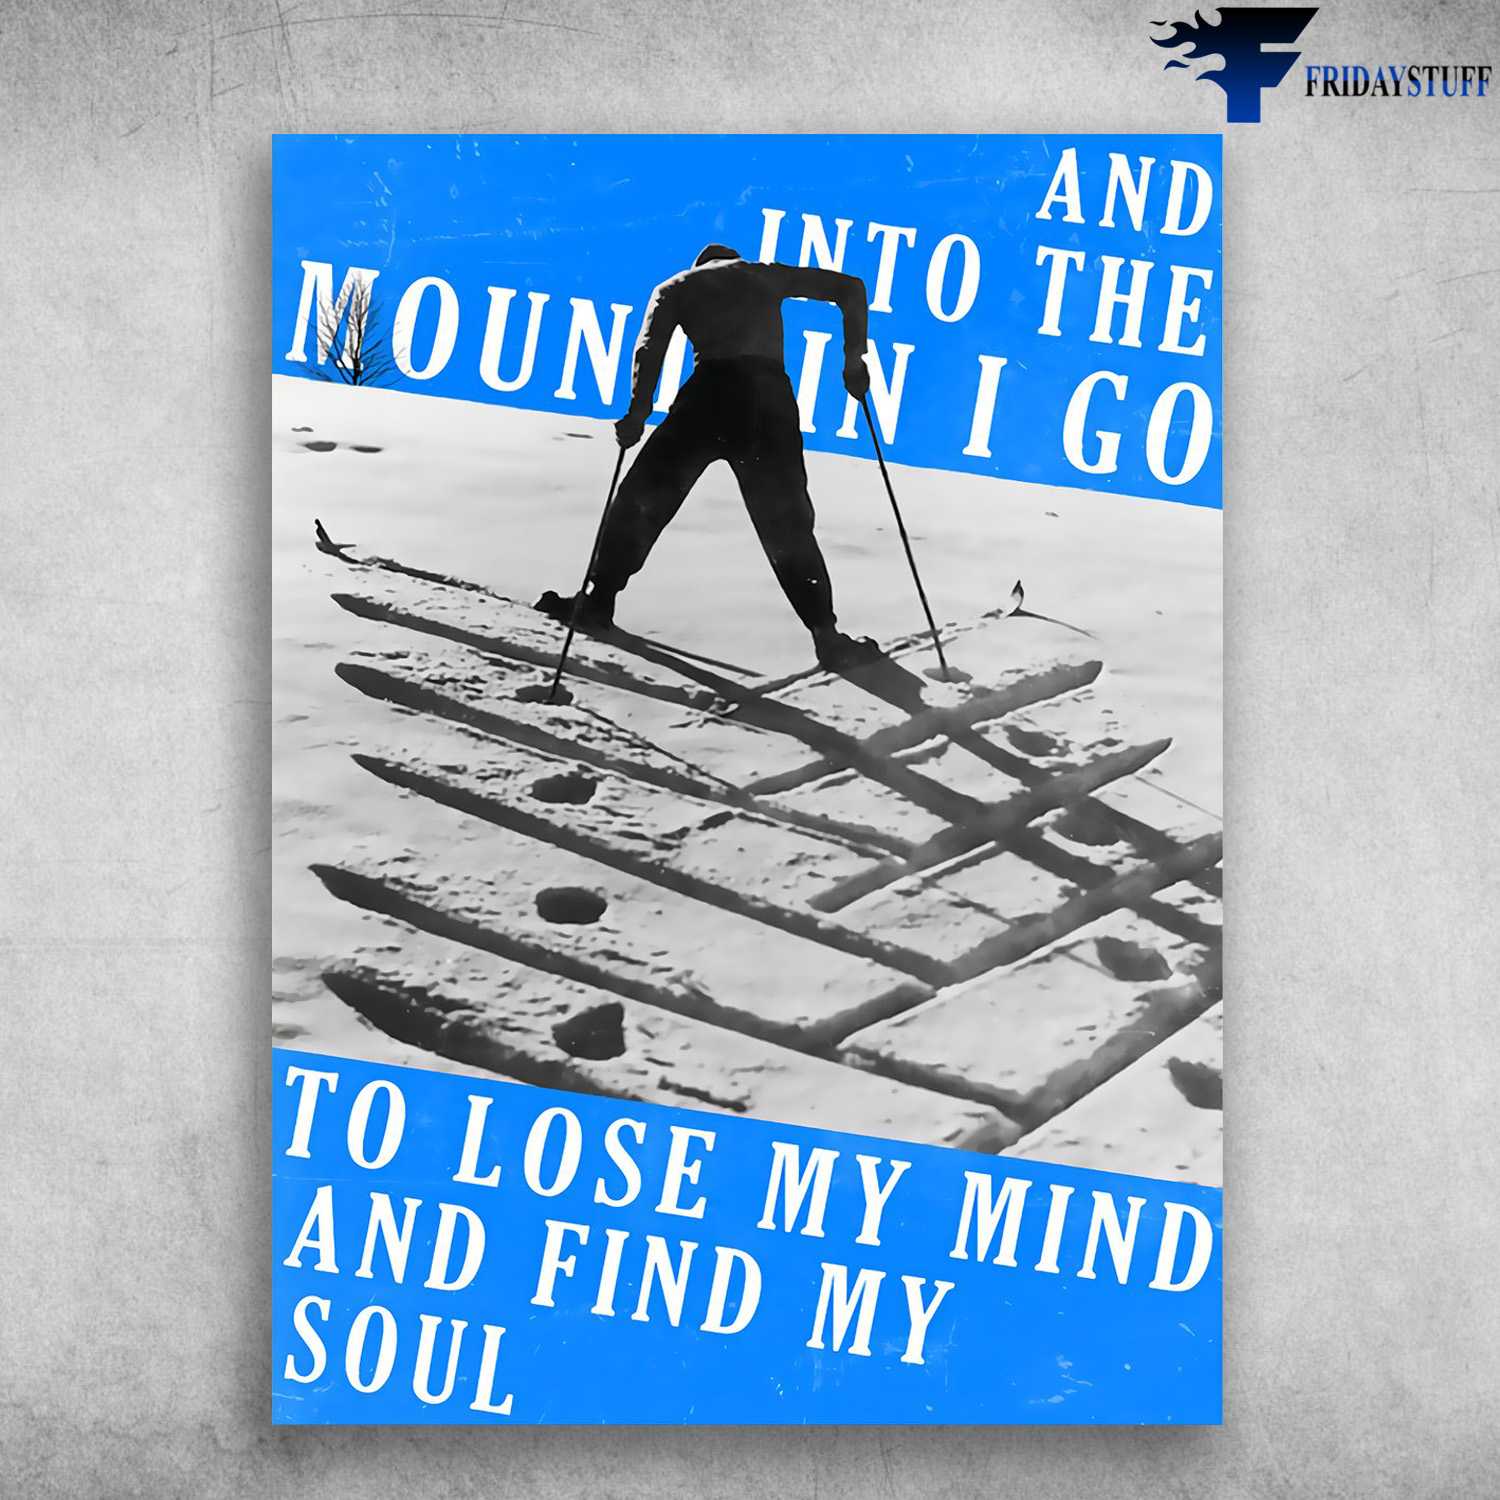 Skiing Man, Skiing Lover, And Into The Mountain, I Go To Lose My Mind, And Find My Soul